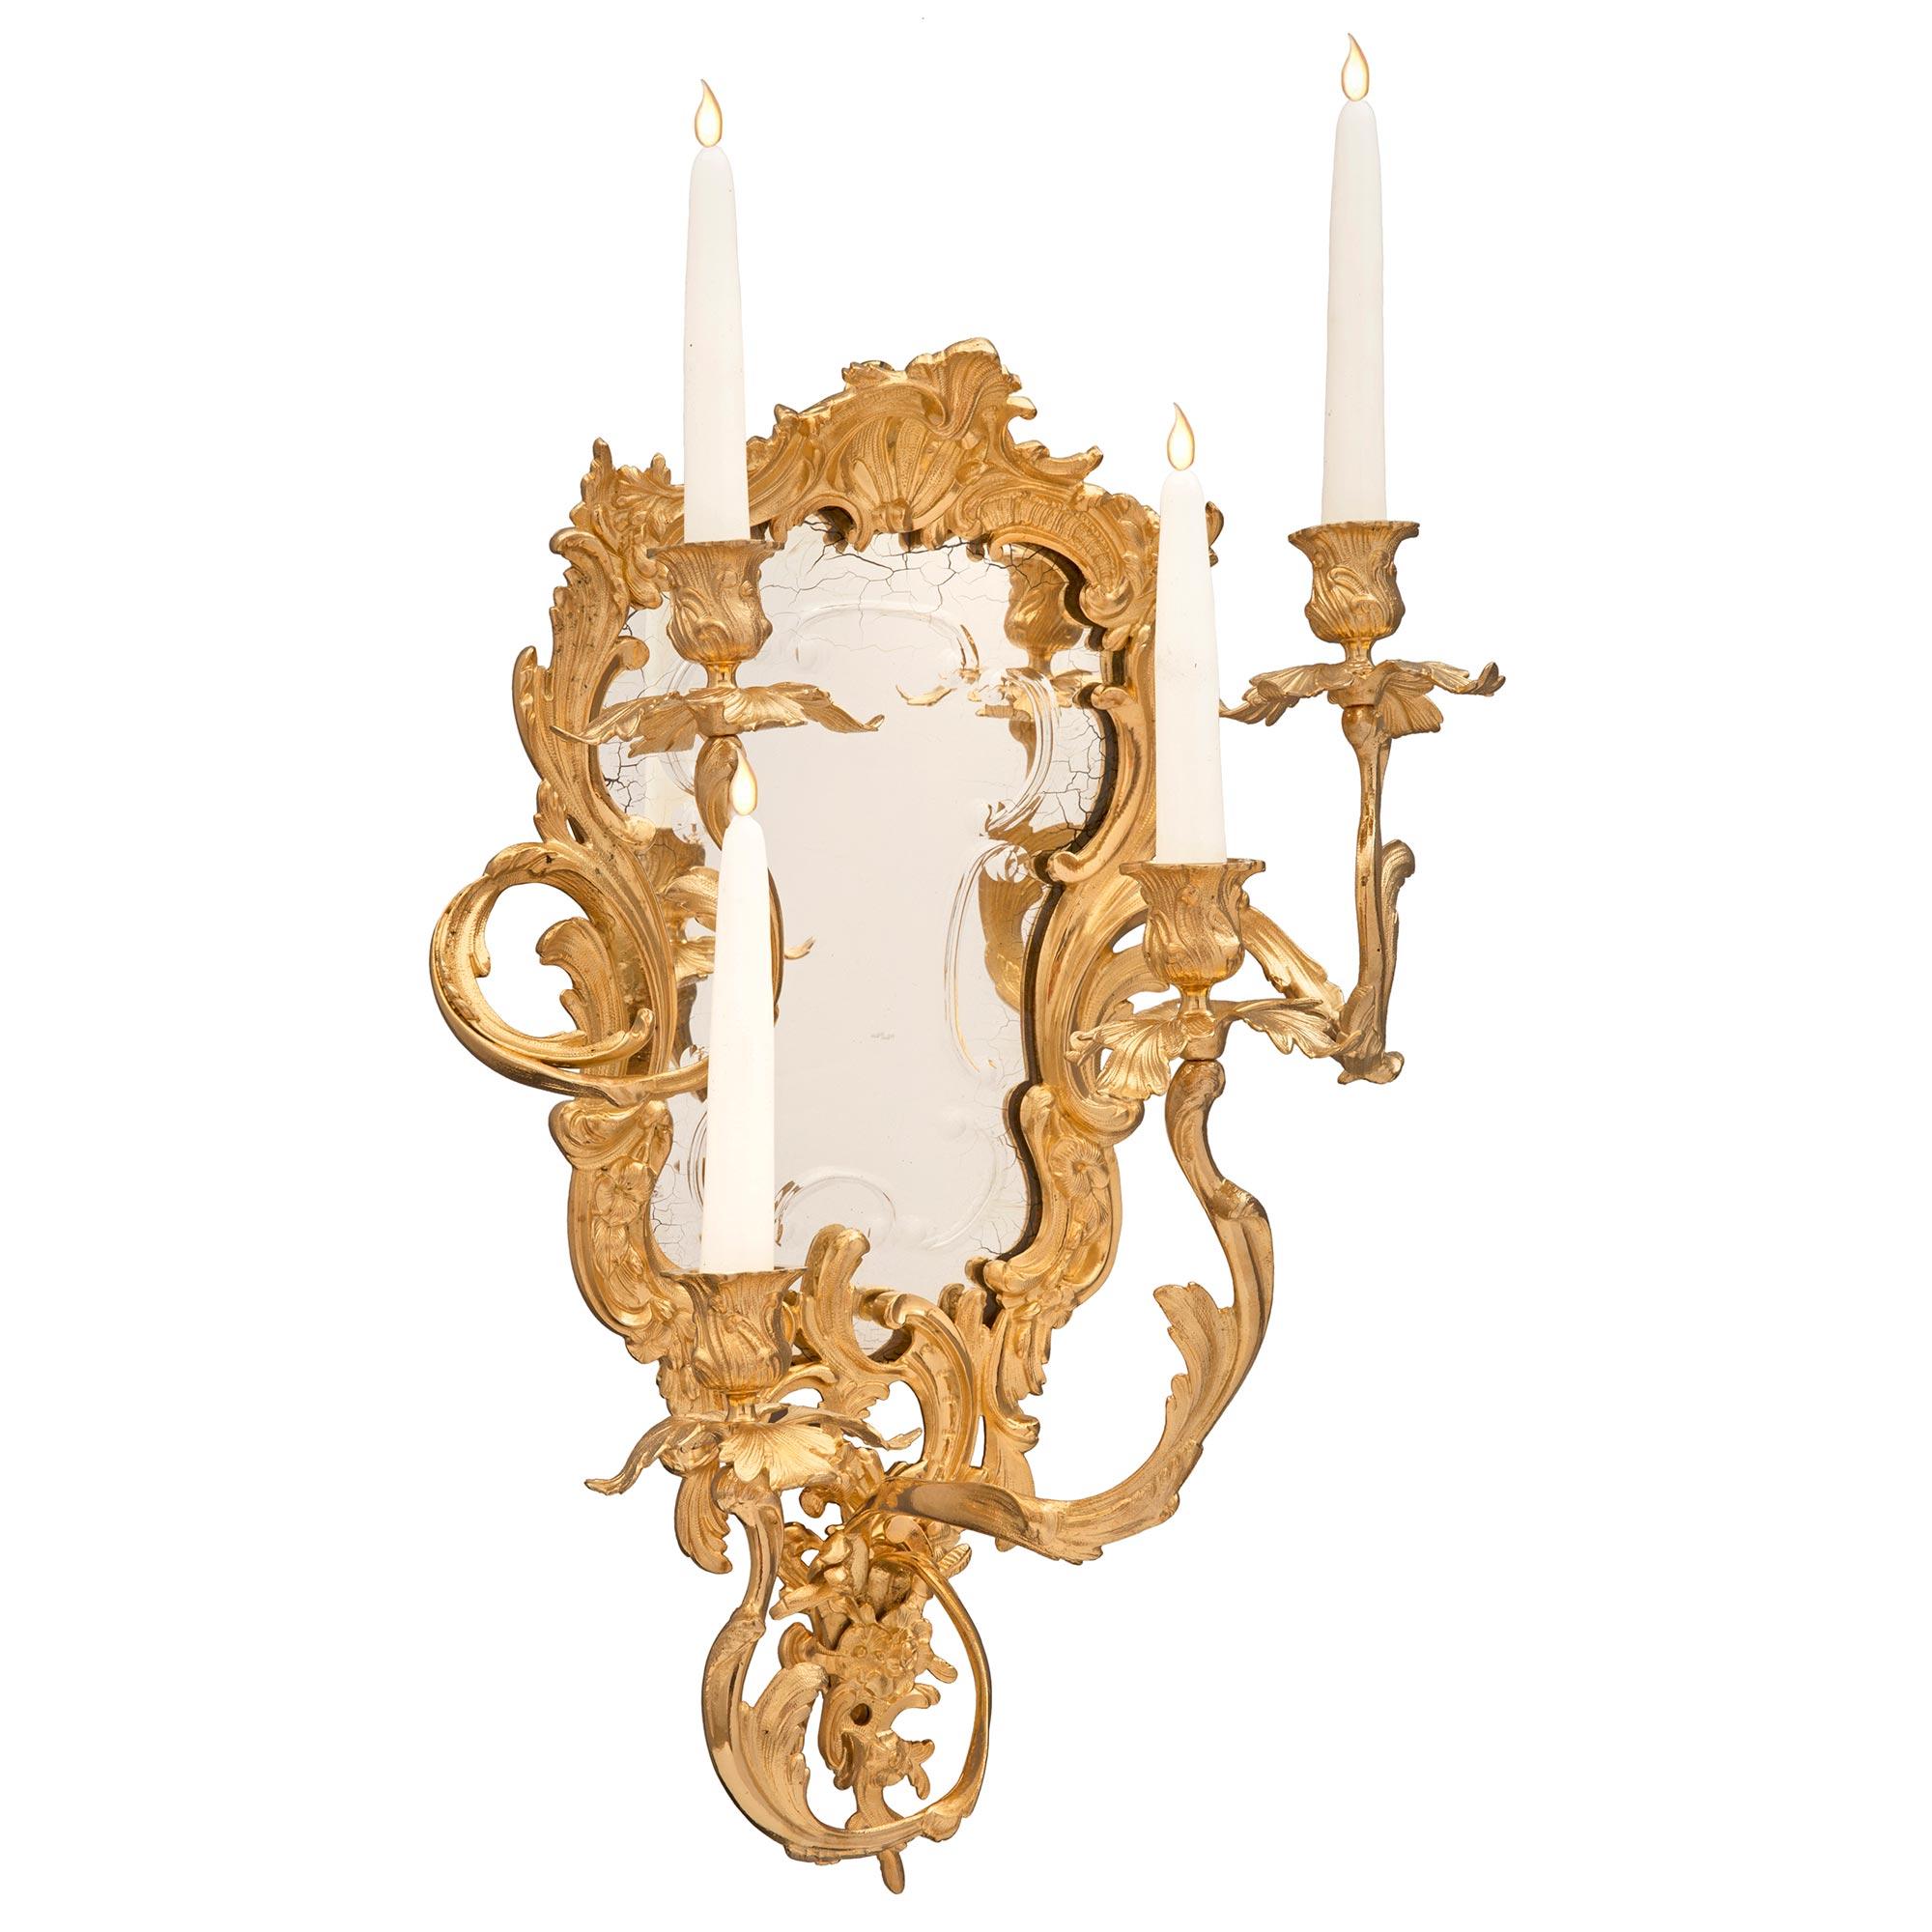 A striking and extremely decorative true pair of Italian 19th century Louis XV st. ormolu mirrored Venetian sconces. Each four arm sconce is centered by a beautiful finely detailed pierced foliate design which extends upwards and throughout the